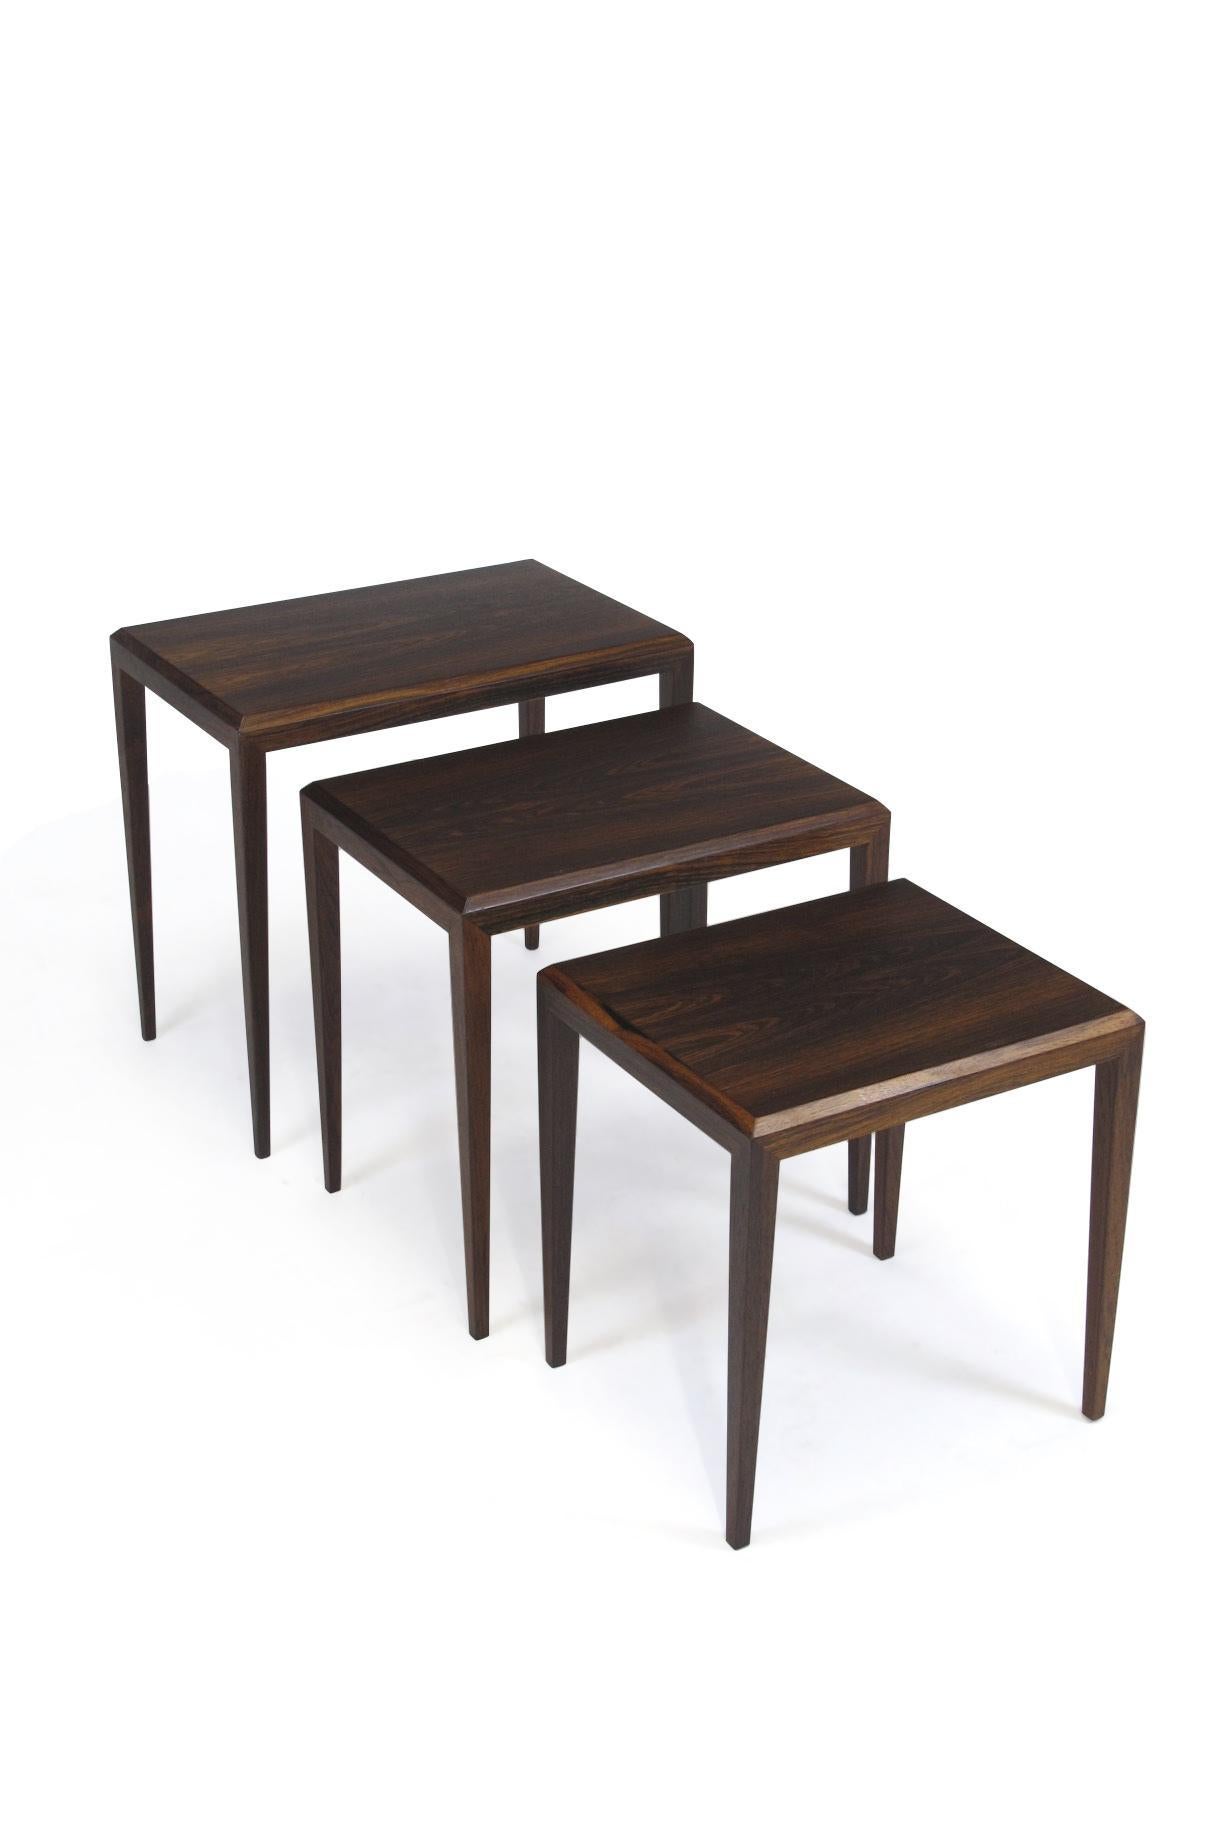 Set of three rosewood nesting tables designed by Johannes Andersen produced by CF Christensen of Silkeborg, Denmark. Nesting system crafted of book-matched rosewood surfaces raised on solid Brazilian rosewood tapered legs. Dark Brazilian rosewood,